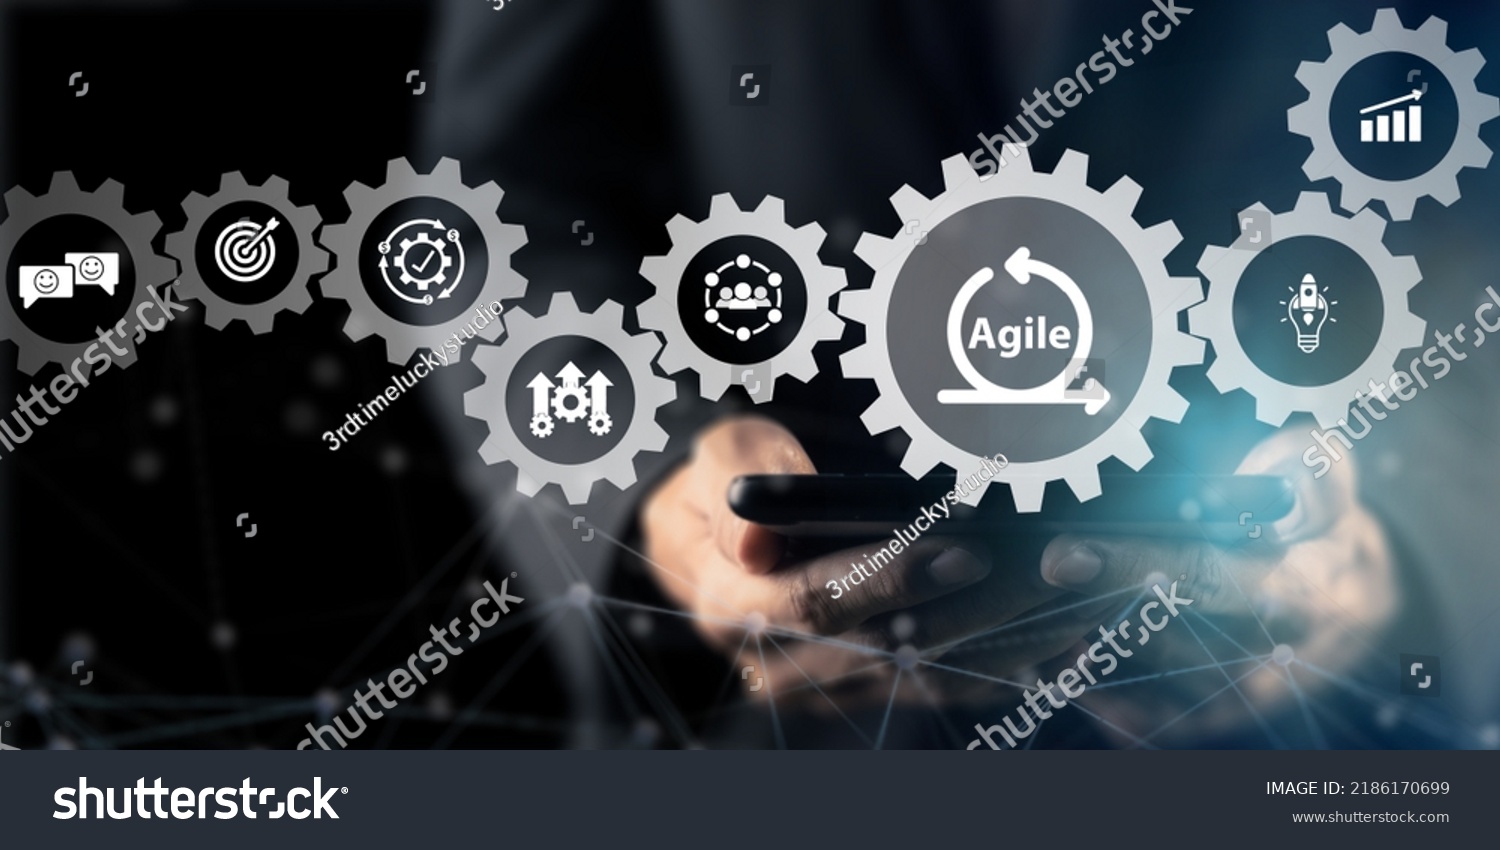 Agile management, the principles of agile software development and lean management to various management processes, product development lifecycle  and project management. Change driven concept. #2186170699